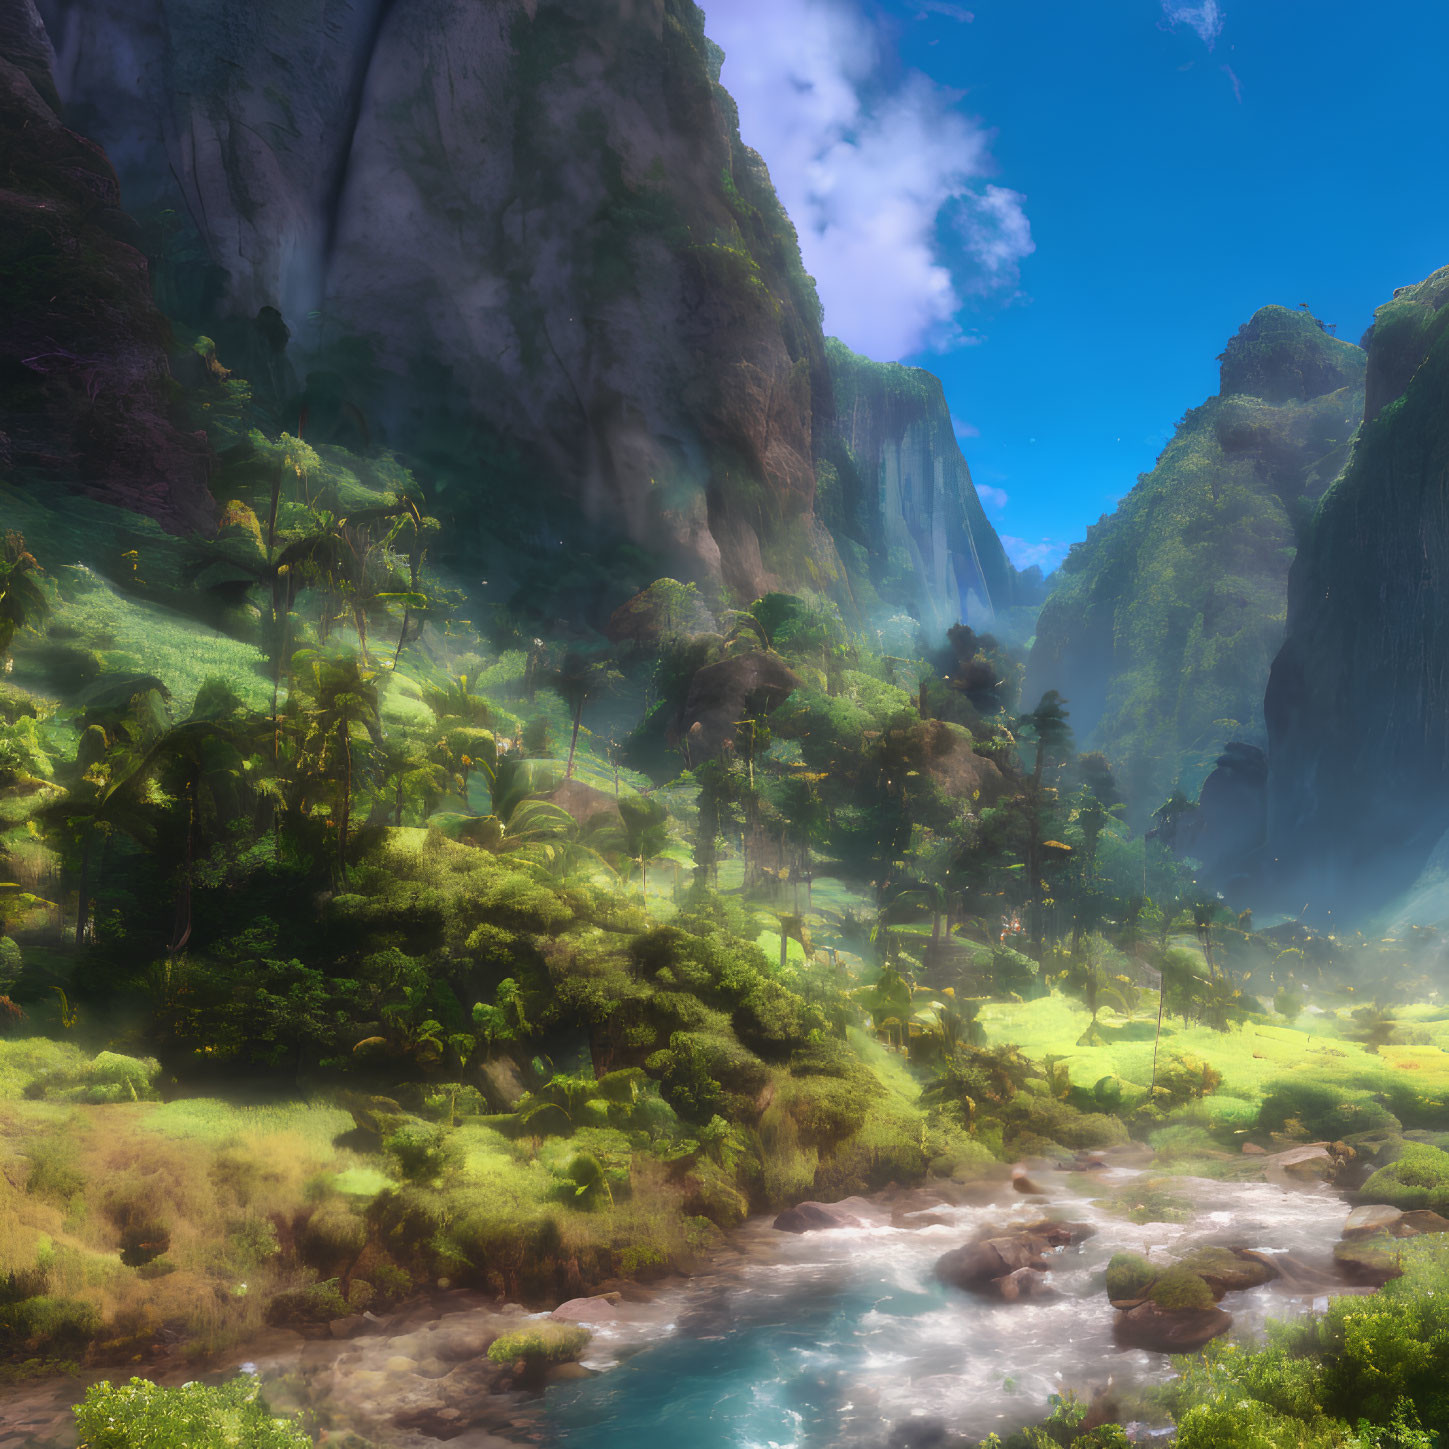 Lush valley with towering cliffs, meandering river, and clear sky